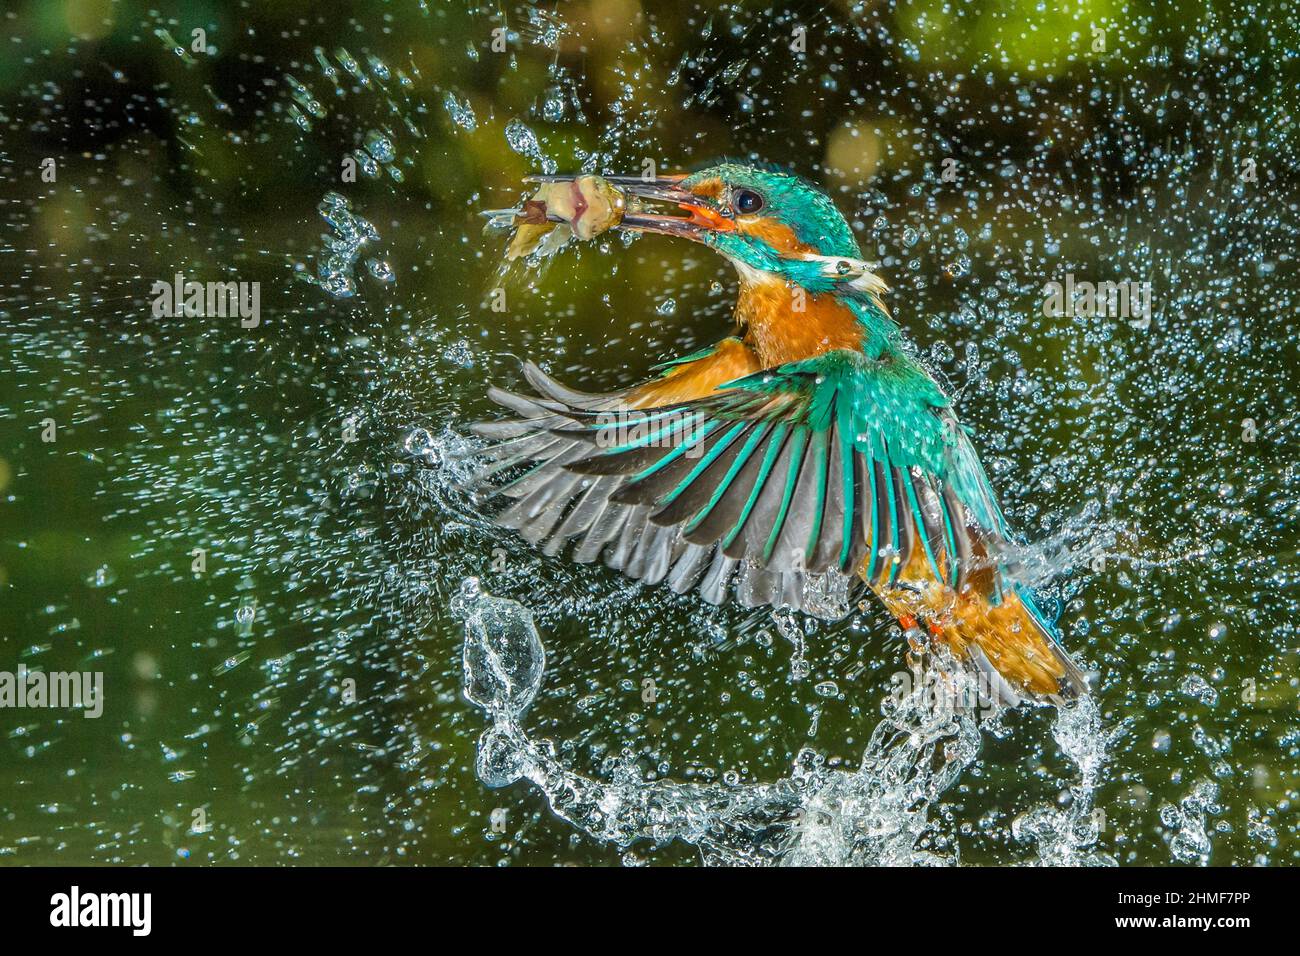 Common kingfisher (Alcedo atthis) with fish as prey, Naarden, Netherlands Stock Photo